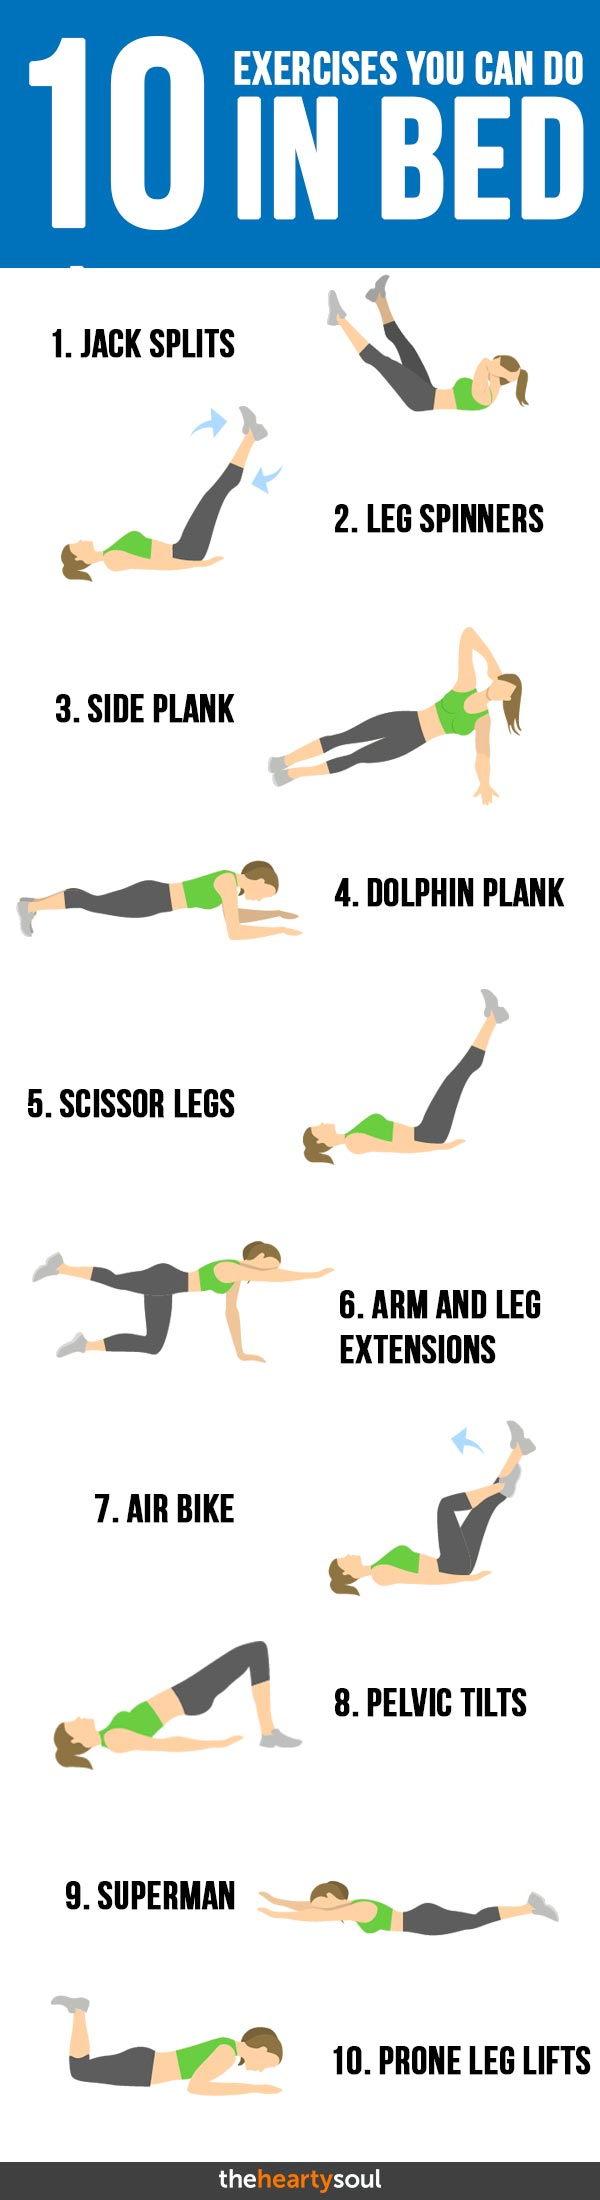 Belly Exercises: 7 exercises for a flat belly